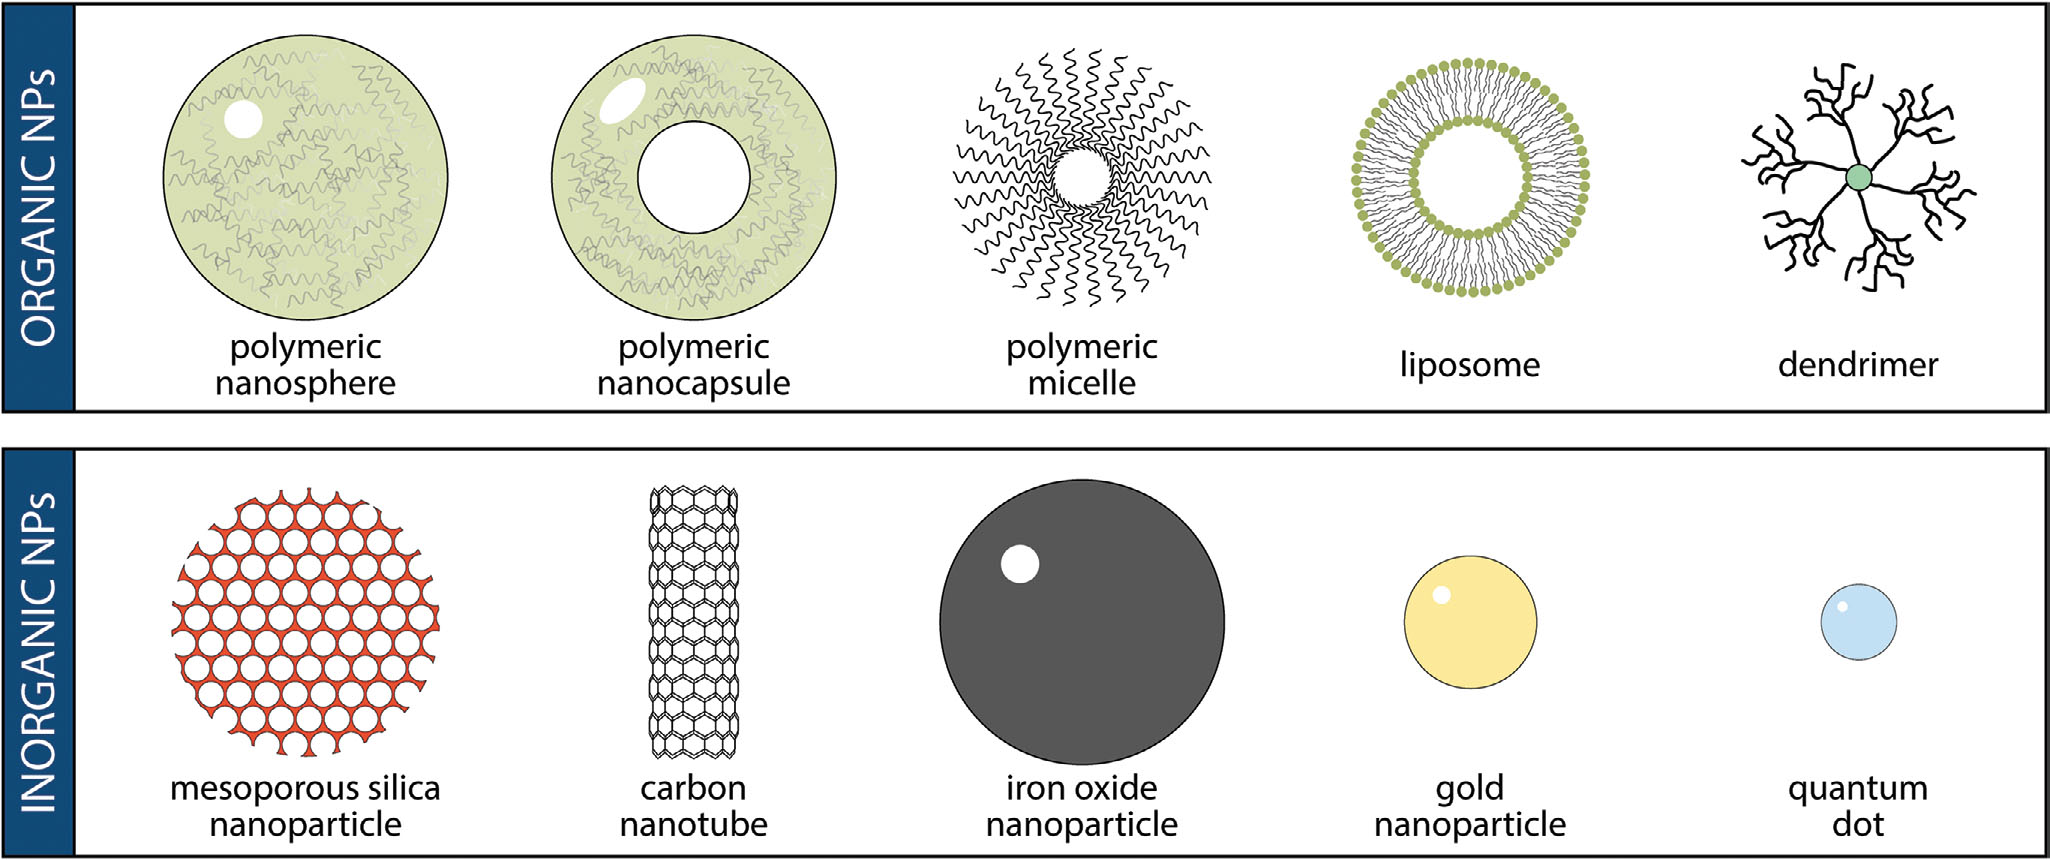 Scheme illustrating various types of organic and inorganic nanoparticles used for vaccine and drug delivery system development